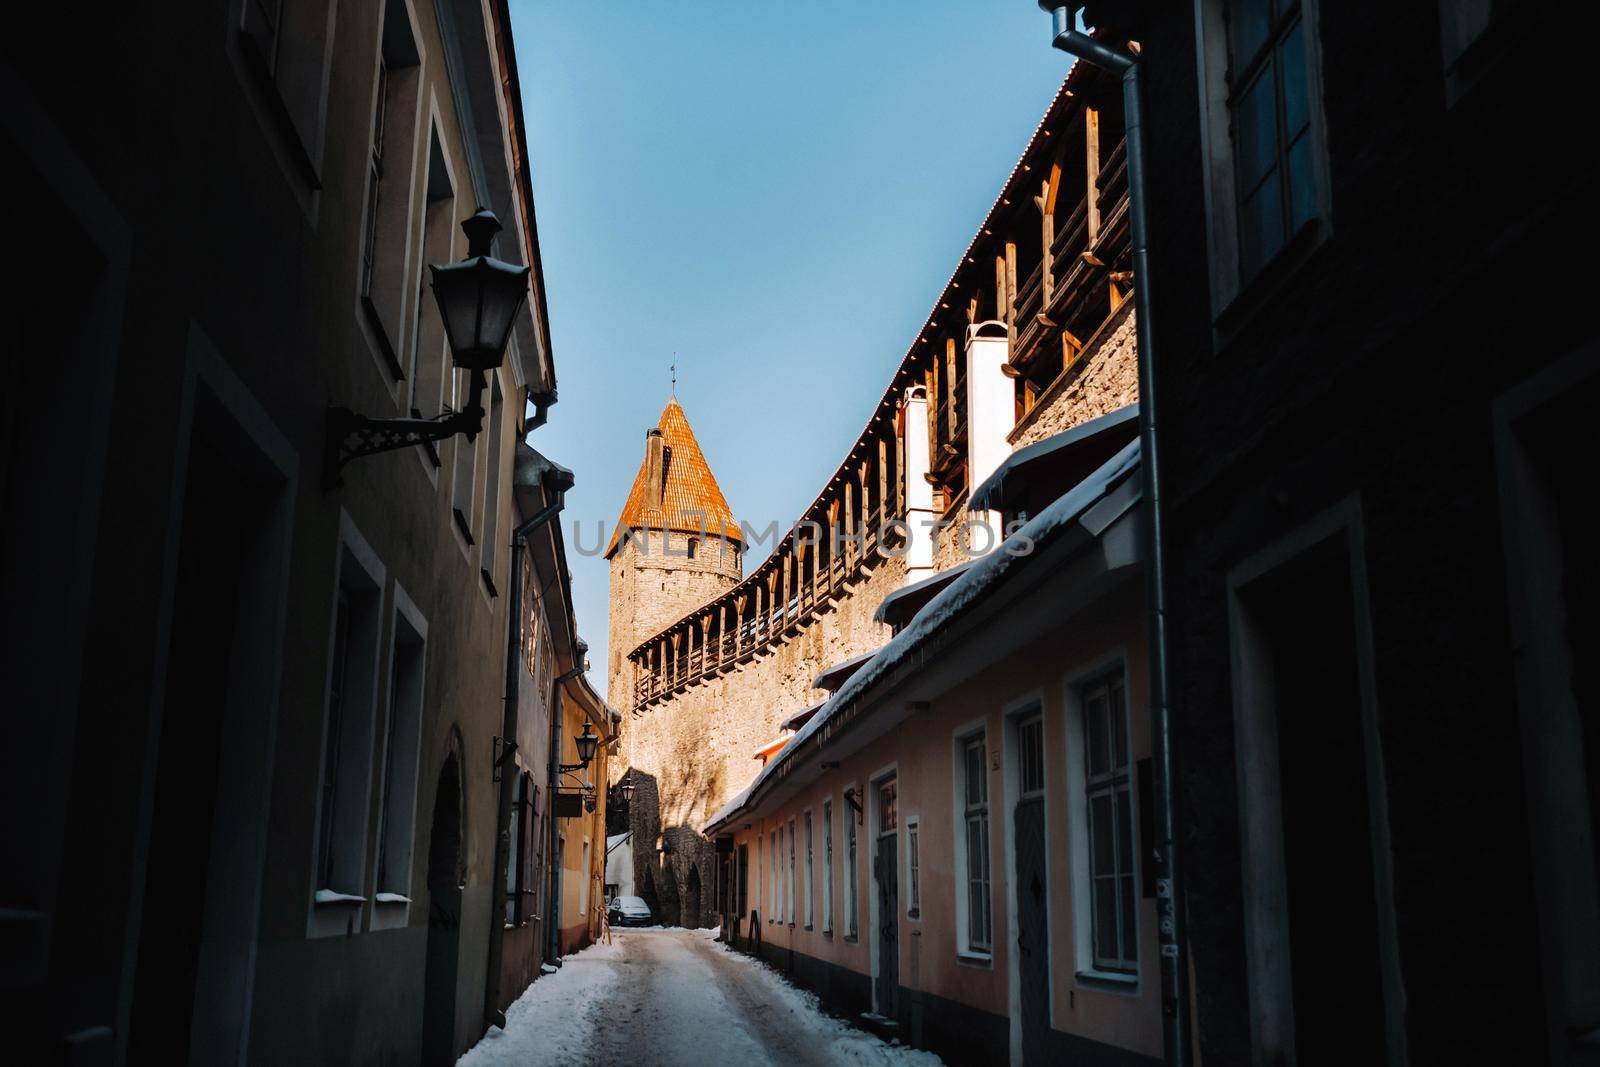 Winter View of the old town of Tallinn.Snow-covered city near the Baltic sea. Estonia.